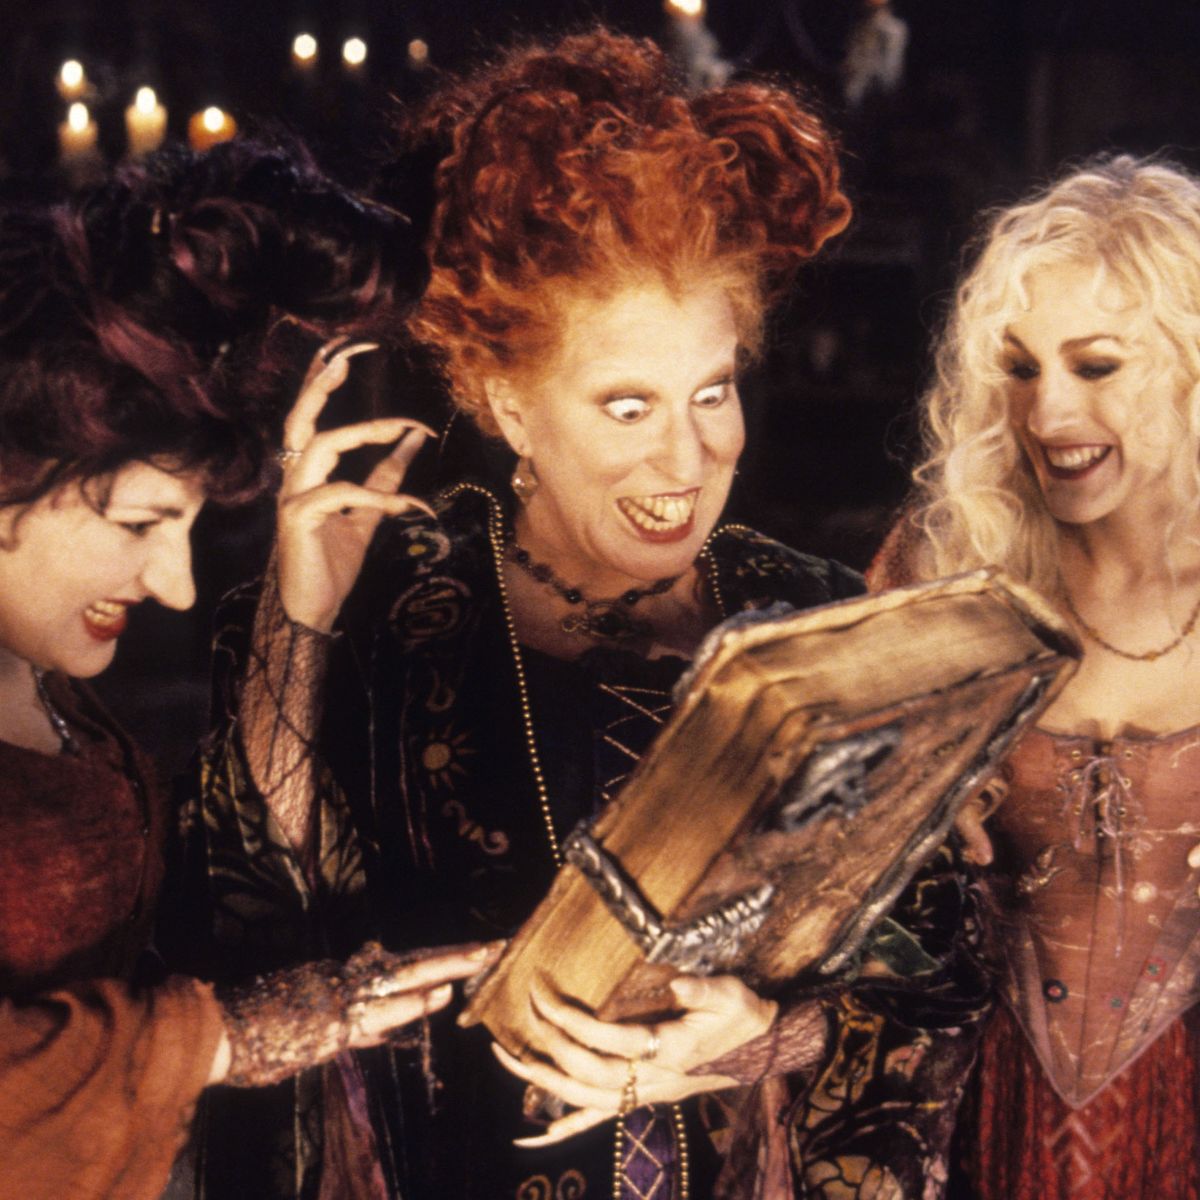 There’s A ‘Hocus Pocus’ Dance Workout You Can Do Right From Your Living Room